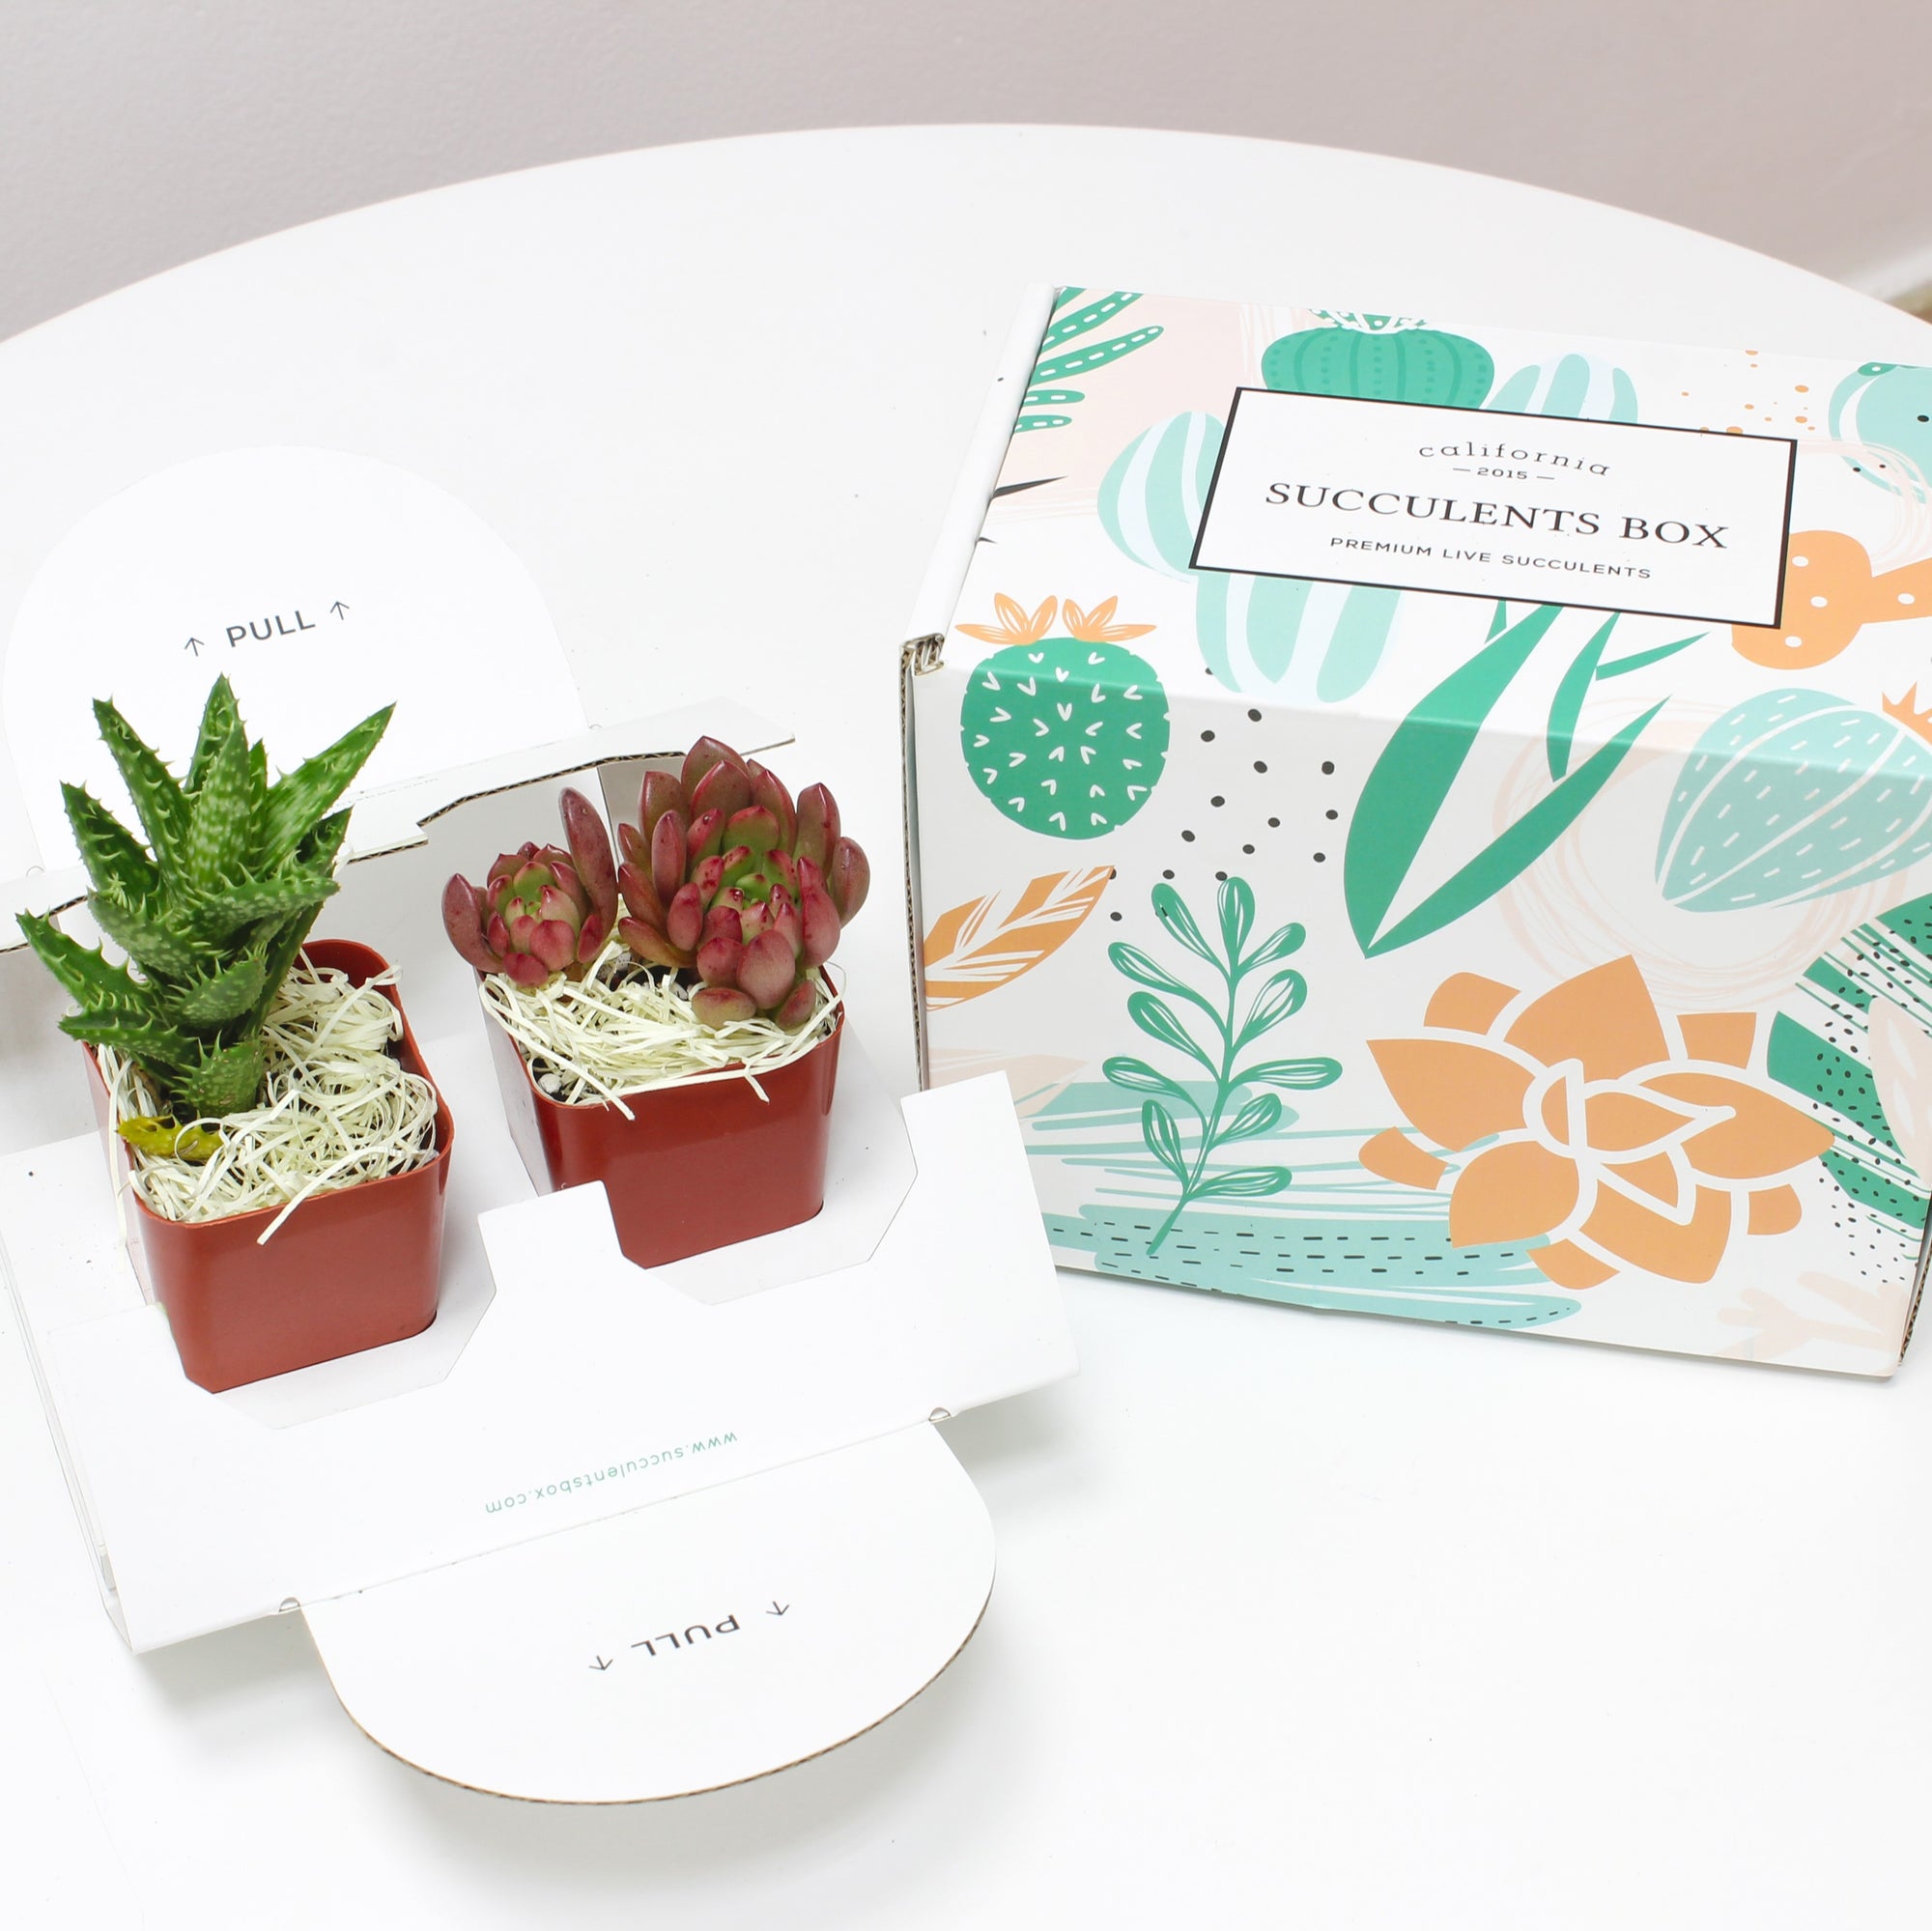 Succulent Subscription Boxes, Succulents Box, Types of Succulent Plants, Succulents for Sale, Succulents in California, Succulents Box with Care Guide